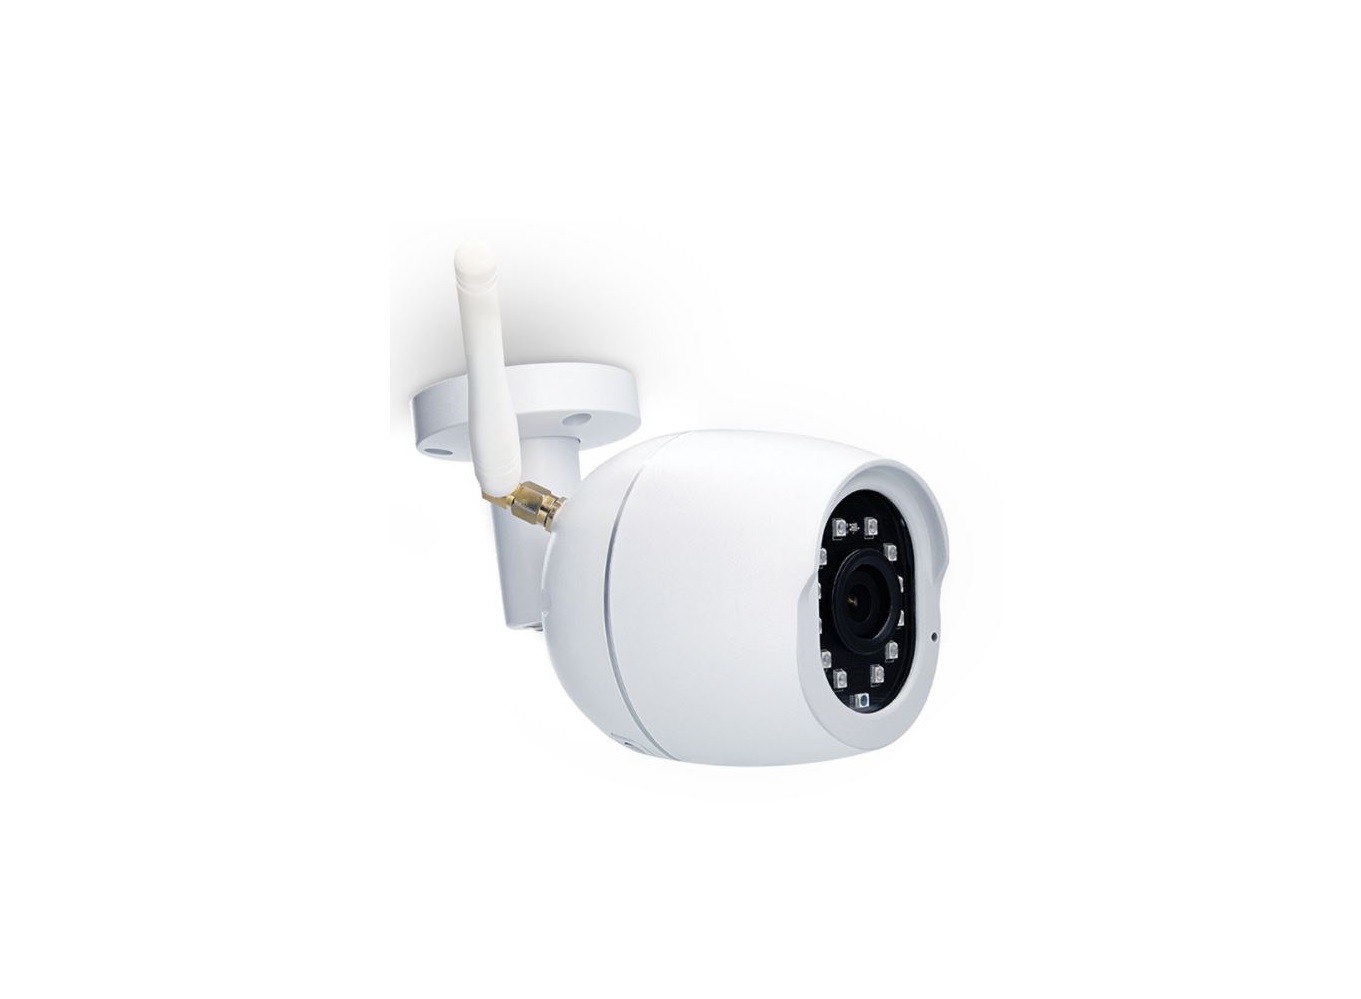 Energizer Smart WiFi Outdoor Camera EOX1-1002 User Guide